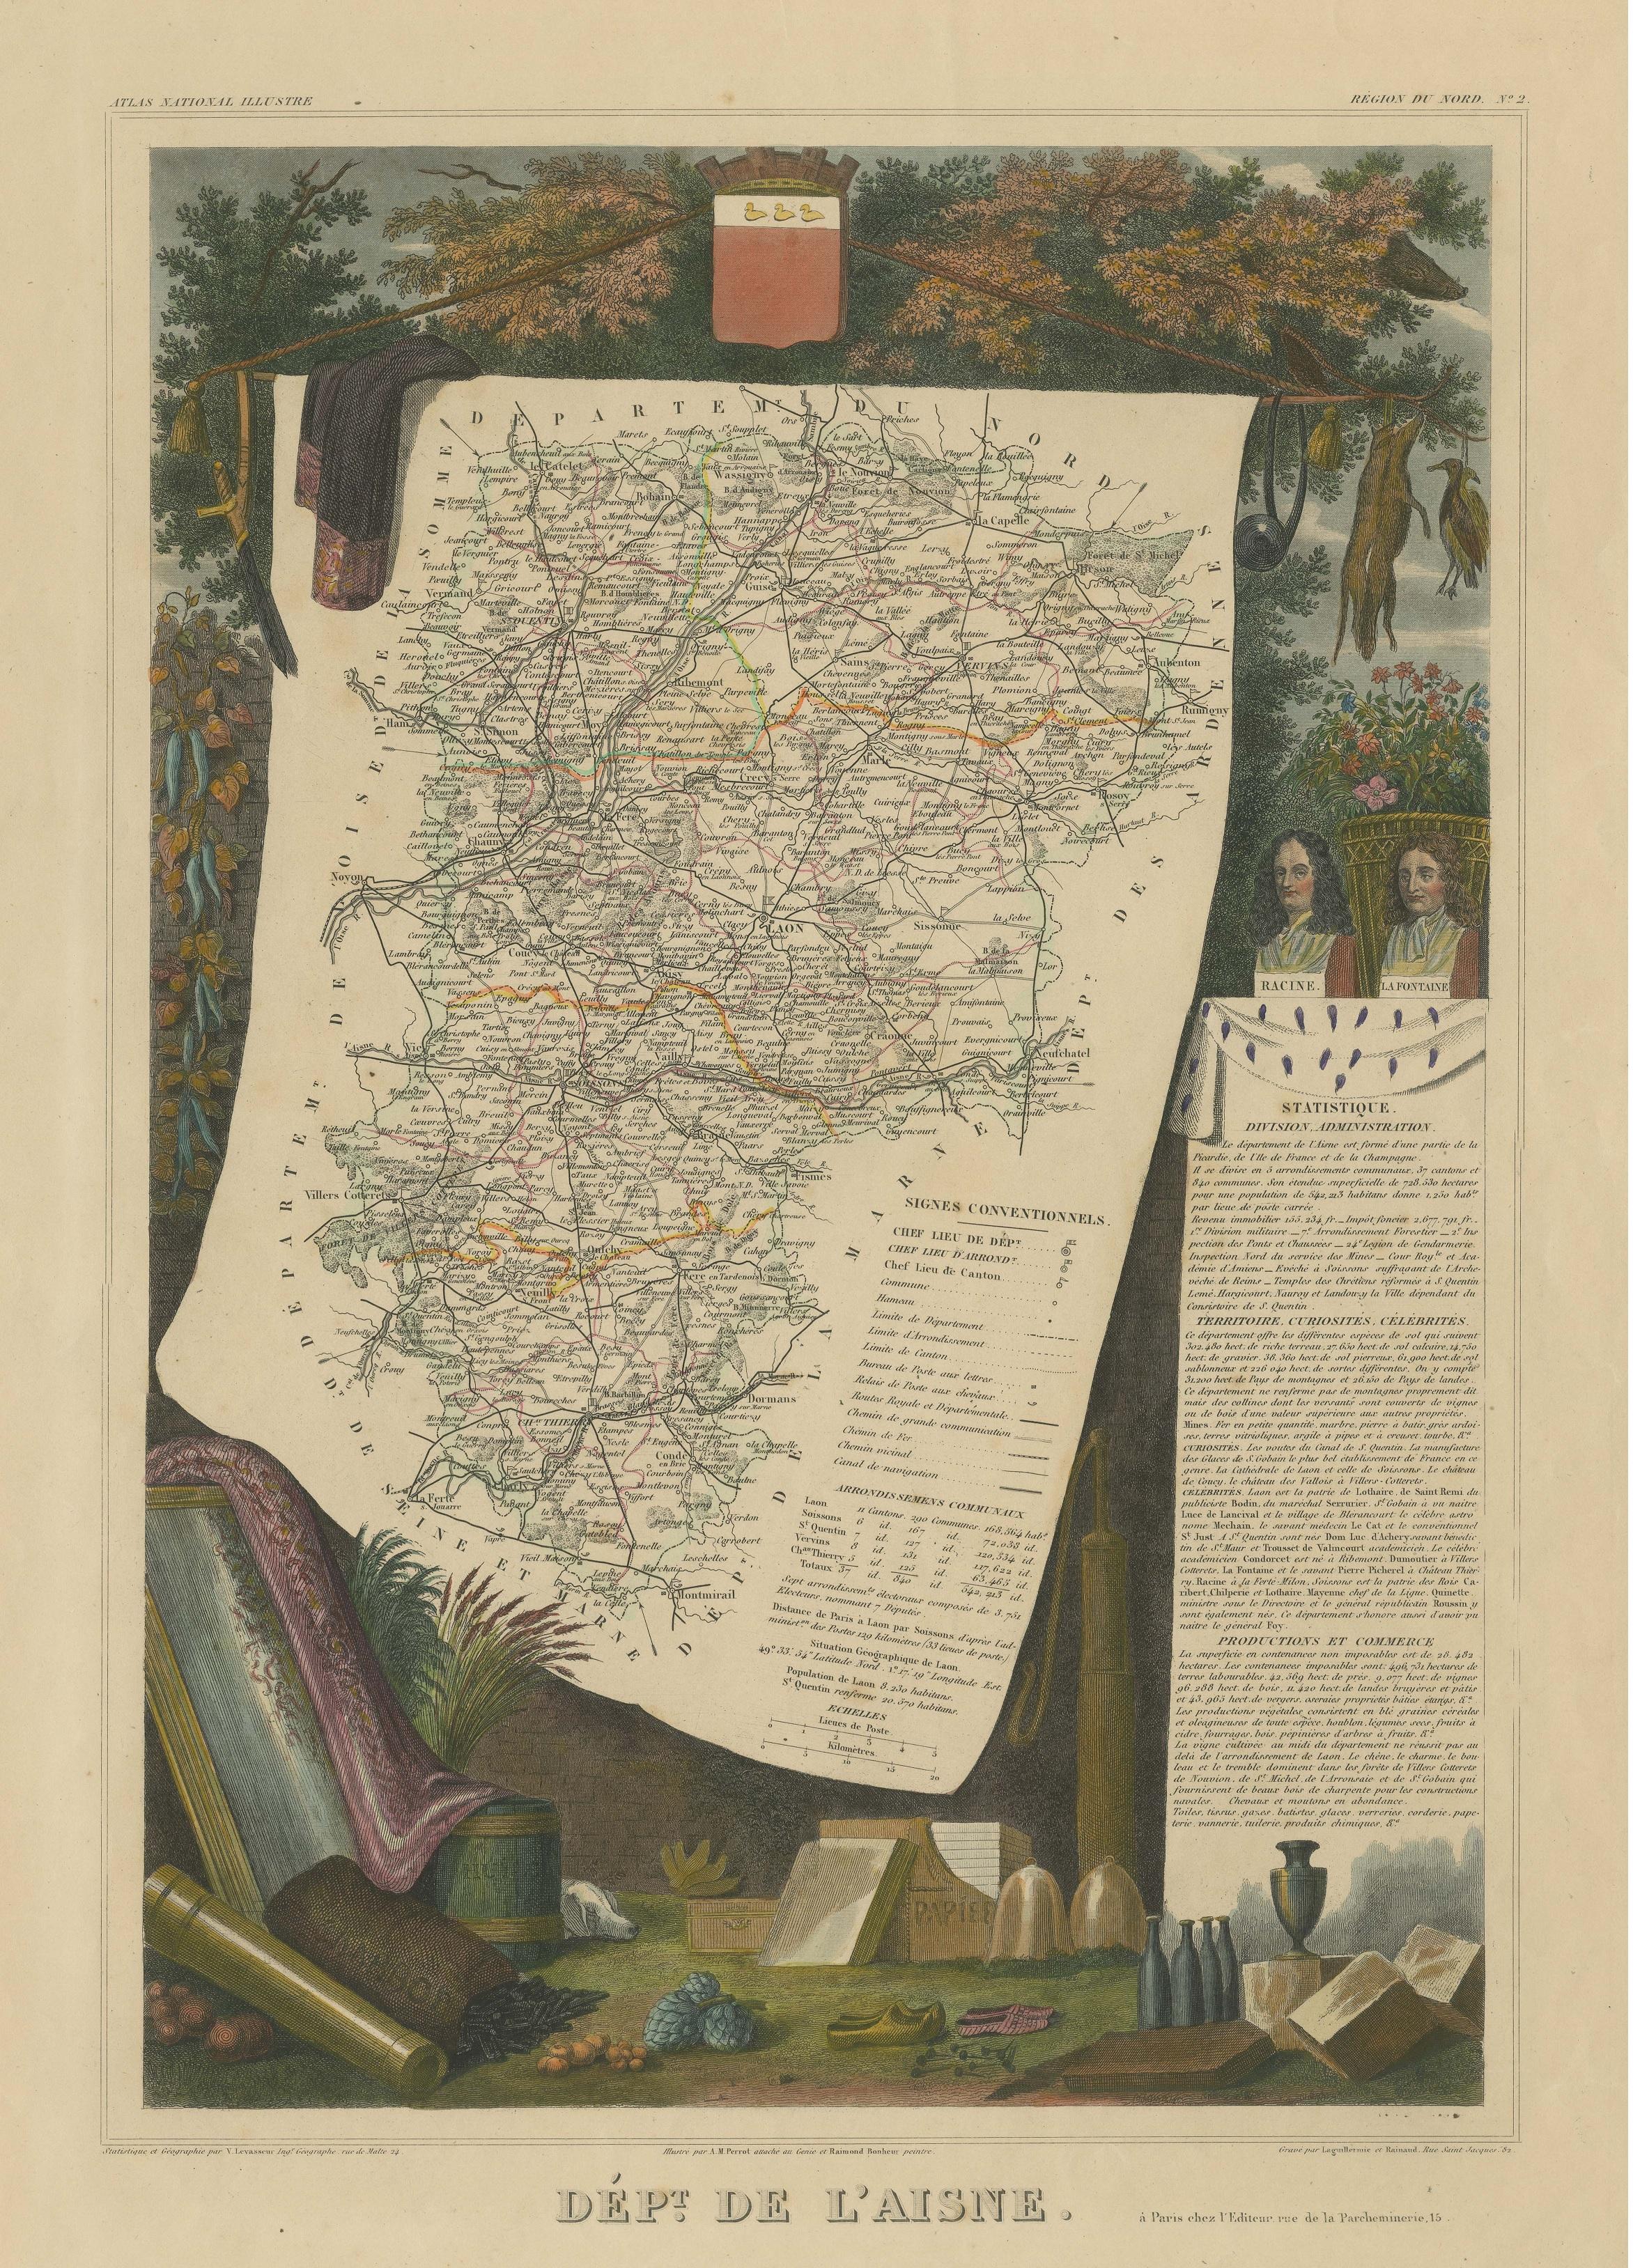 Old Map of the French department of l'Aisne, Frankreich im Zustand „Gut“ im Angebot in Langweer, NL